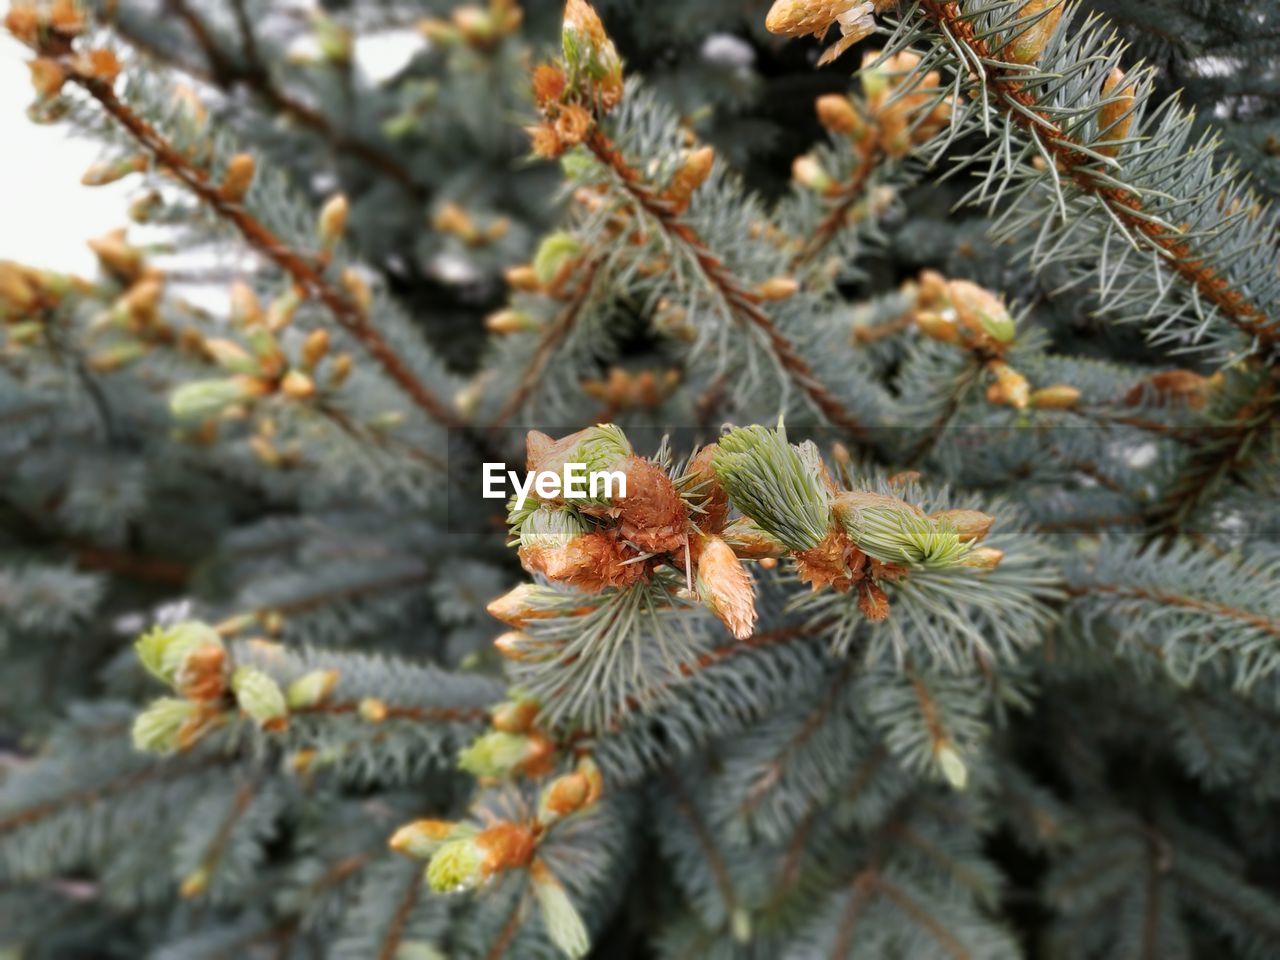 CLOSE-UP OF PINE CONE ON BRANCH